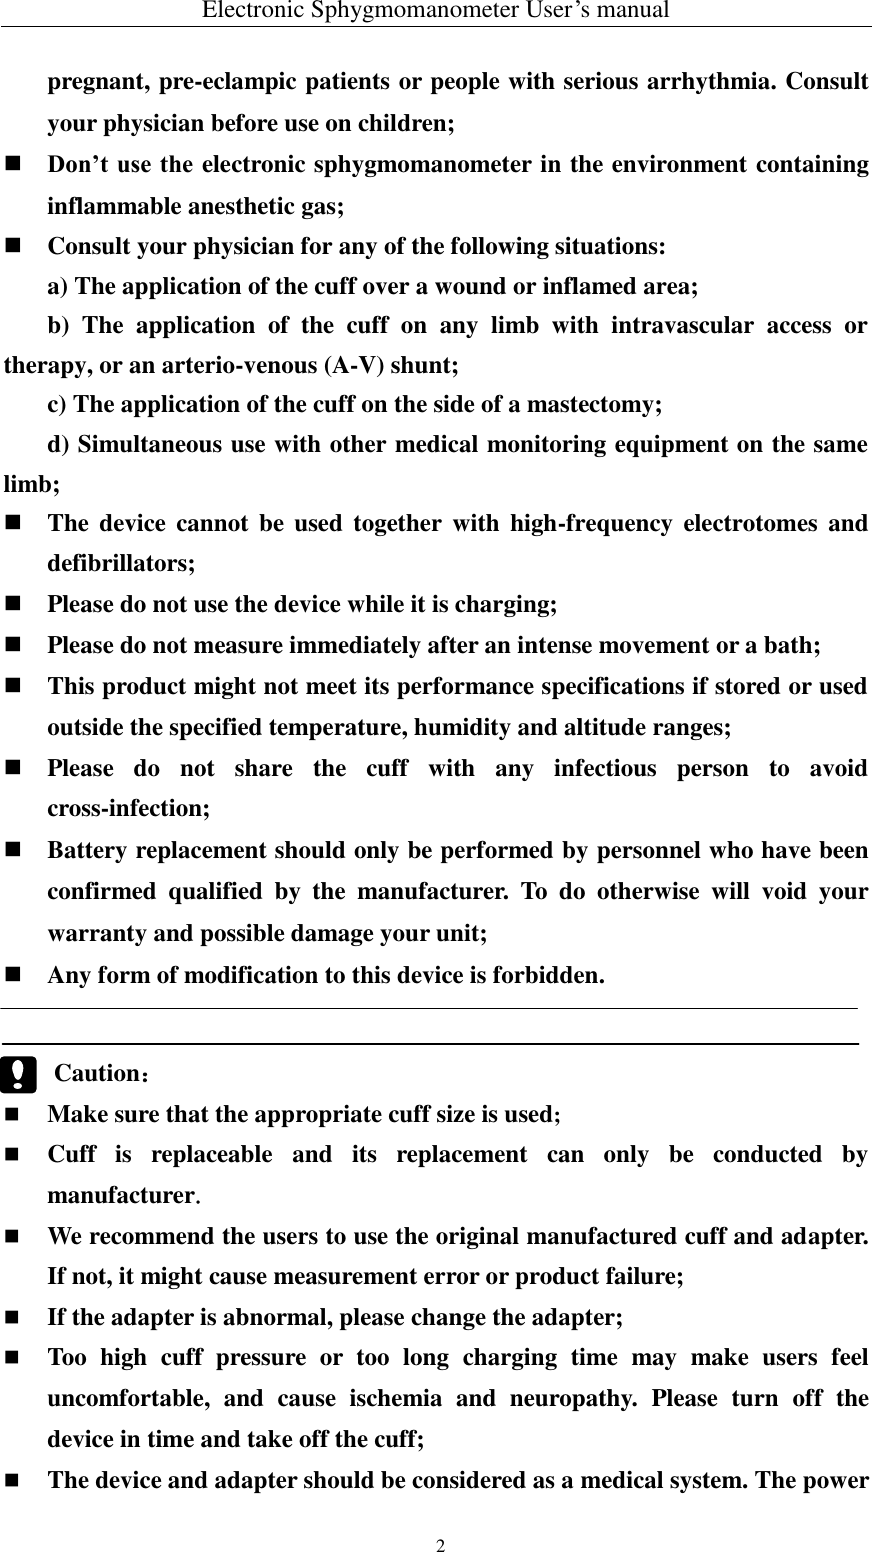 Electronic Sphygmomanometer User’s manual   2   pregnant, pre-eclampic patients or people with serious arrhythmia. Consult your physician before use on children;  Don’t use the electronic sphygmomanometer in the environment containing inflammable anesthetic gas;  Consult your physician for any of the following situations: a) The application of the cuff over a wound or inflamed area; b)  The  application  of  the  cuff  on  any  limb  with  intravascular  access  or therapy, or an arterio-venous (A-V) shunt; c) The application of the cuff on the side of a mastectomy; d) Simultaneous use with other medical monitoring equipment on the same limb;  The  device  cannot  be used  together  with  high-frequency electrotomes  and defibrillators;  Please do not use the device while it is charging;  Please do not measure immediately after an intense movement or a bath;  This product might not meet its performance specifications if stored or used outside the specified temperature, humidity and altitude ranges;  Please  do  not  share  the  cuff  with  any  infectious  person  to  avoid cross-infection;  Battery replacement should only be performed by personnel who have been confirmed  qualified  by  the  manufacturer.  To  do  otherwise  will  void  your warranty and possible damage your unit;  Any form of modification to this device is forbidden.   Caution：  Make sure that the appropriate cuff size is used;  Cuff  is  replaceable  and  its  replacement  can  only  be  conducted  by manufacturer.  We recommend the users to use the original manufactured cuff and adapter. If not, it might cause measurement error or product failure;  If the adapter is abnormal, please change the adapter;  Too  high  cuff  pressure  or  too  long  charging  time  may  make  users  feel uncomfortable,  and  cause  ischemia  and  neuropathy.  Please  turn  off  the device in time and take off the cuff;  The device and adapter should be considered as a medical system. The power 